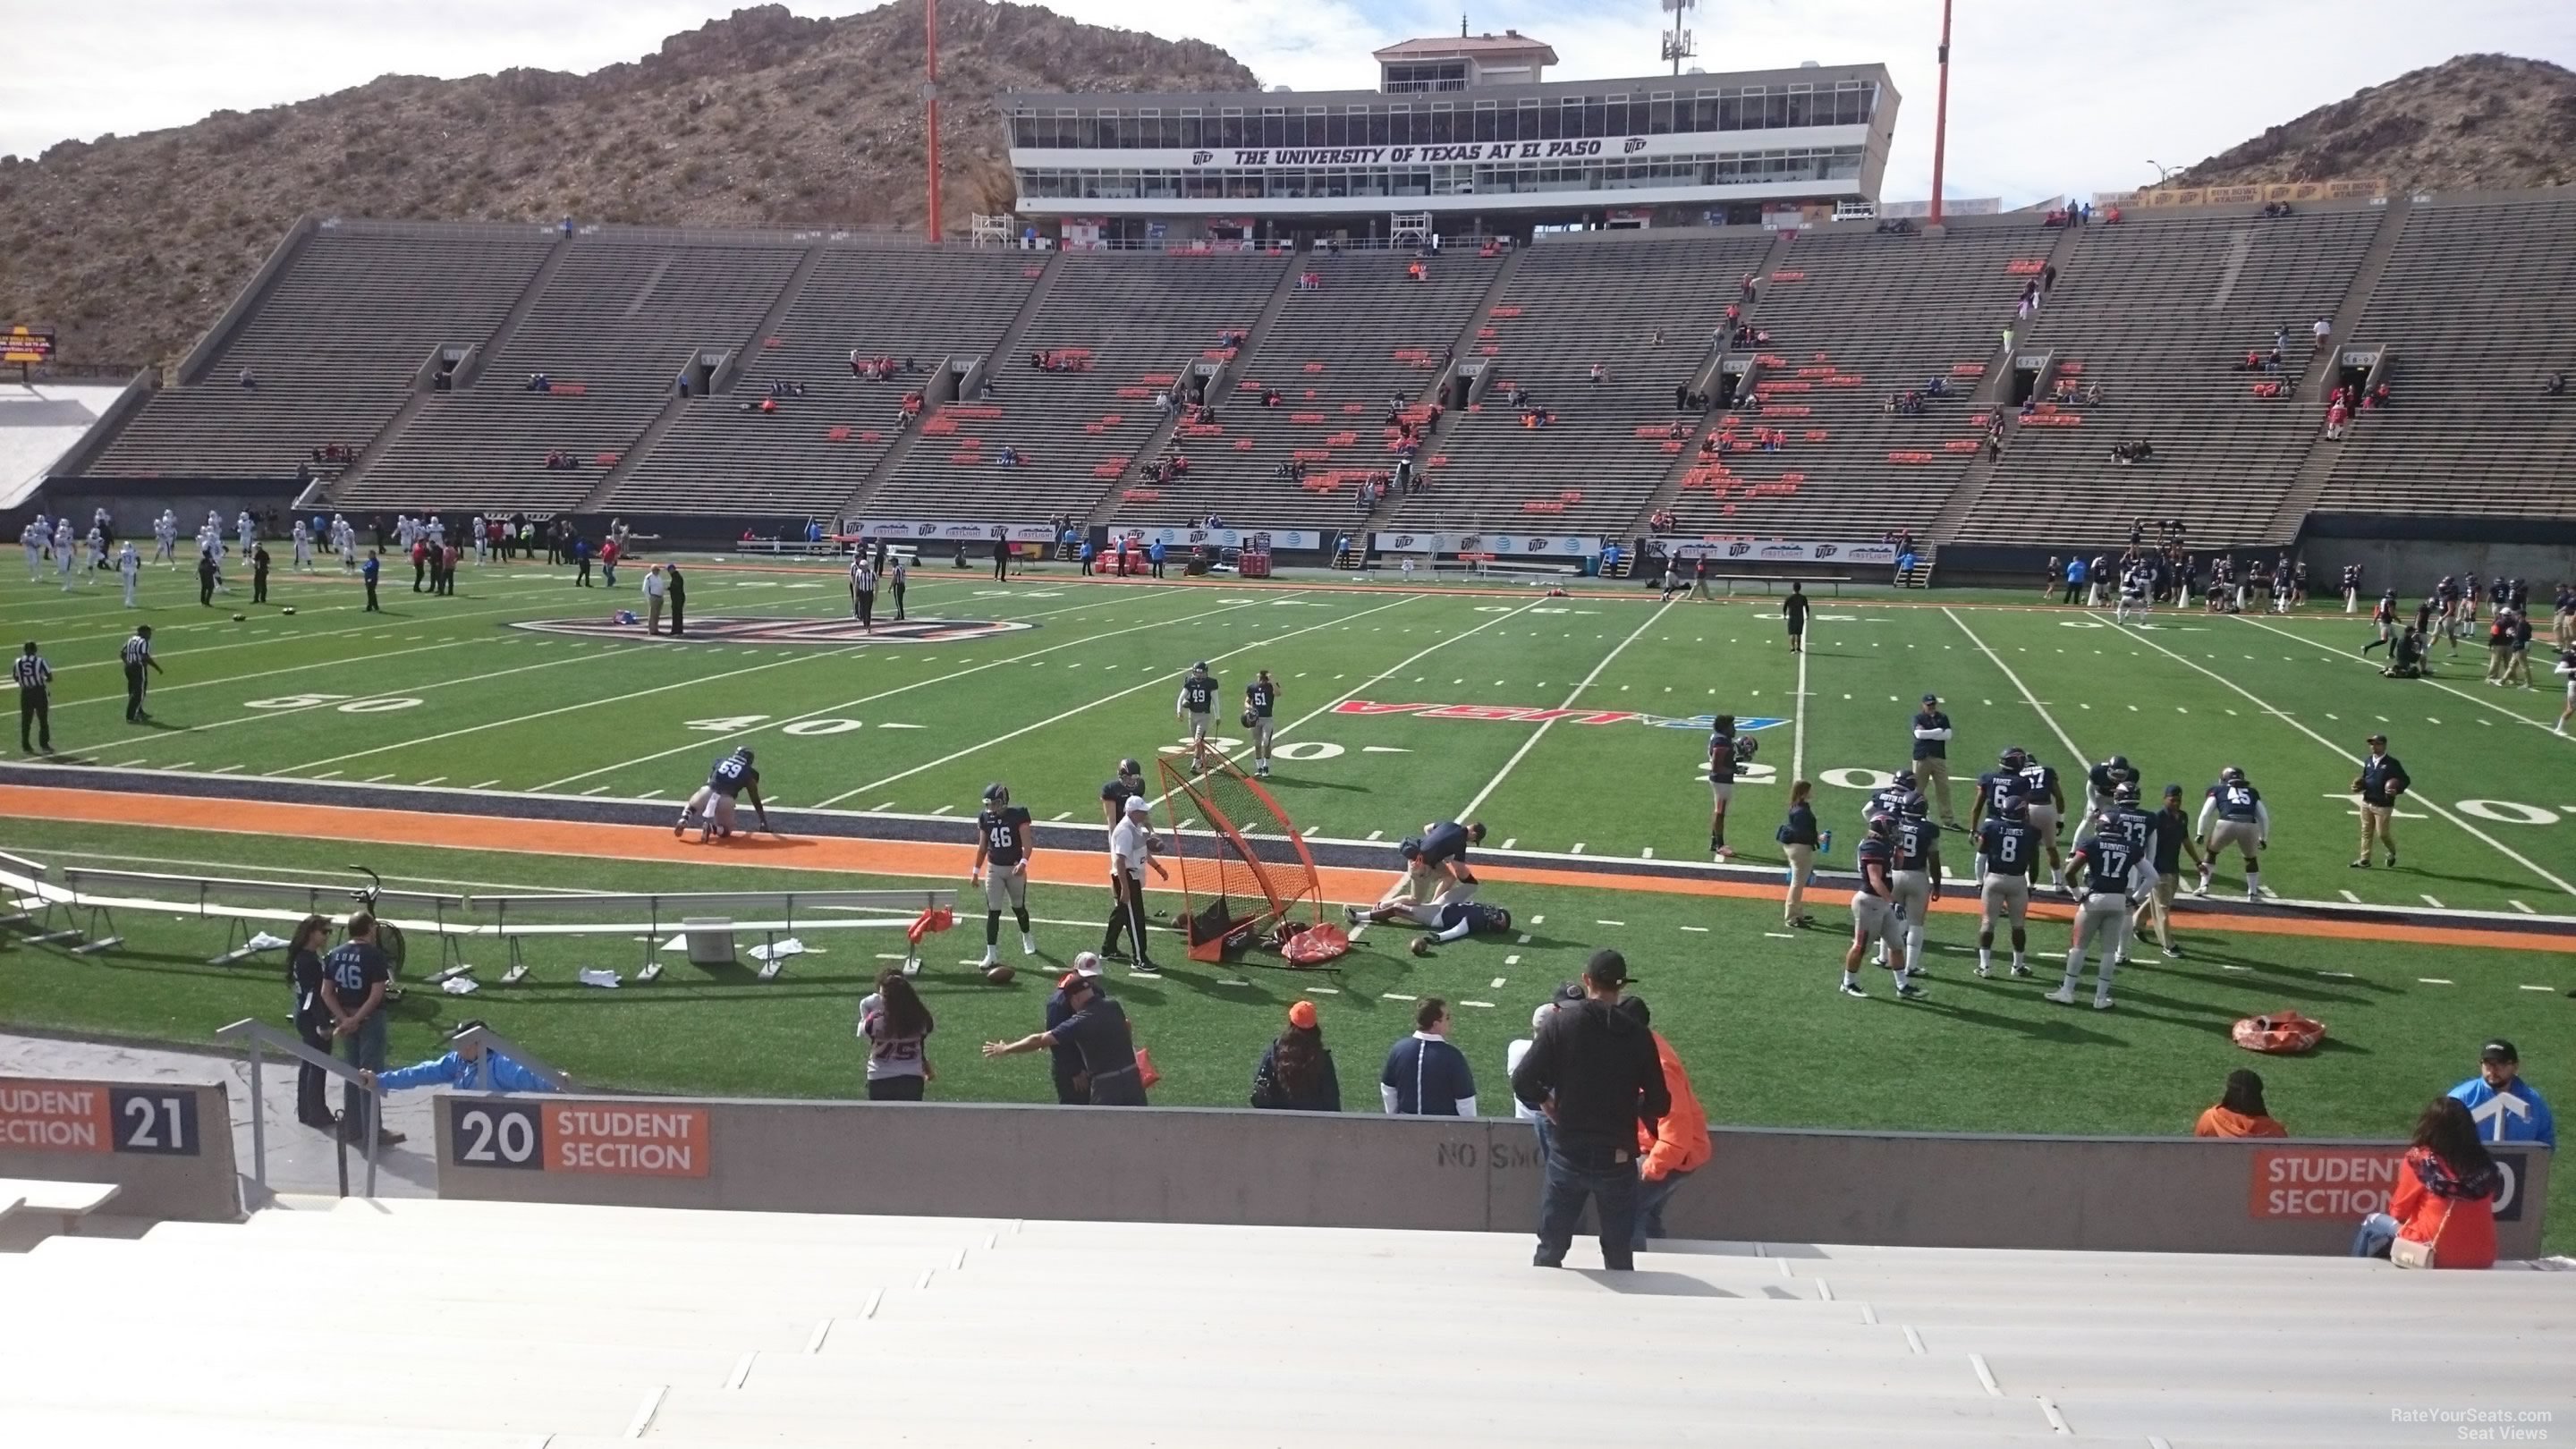 section 20, row 15 seat view  for football - sun bowl